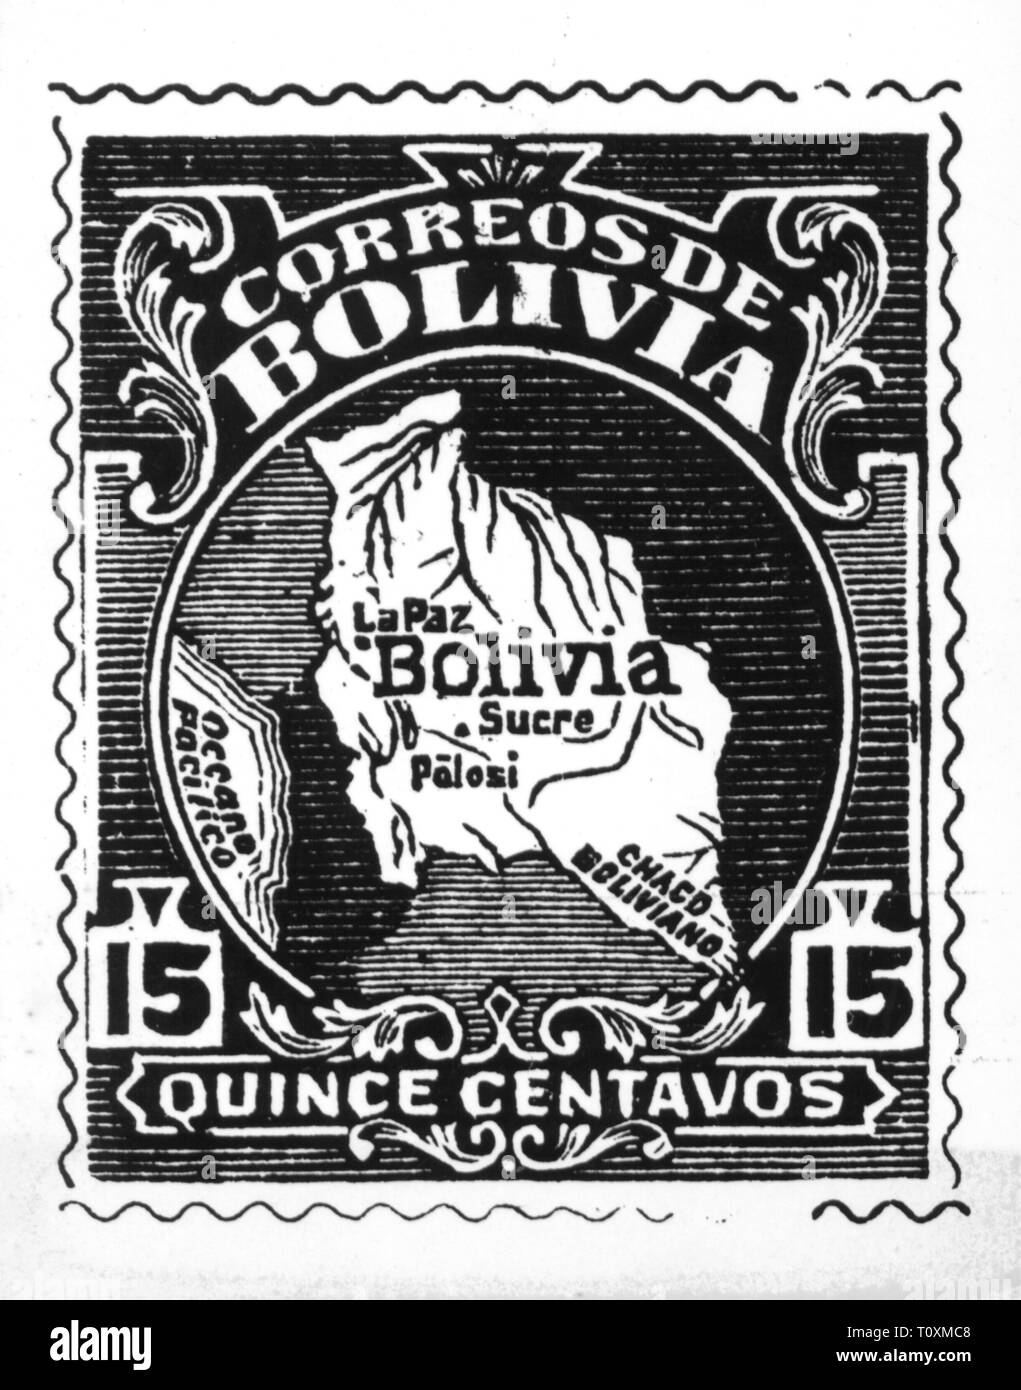 mail, postage stamps, Bolivia, 15 centavos postage stamp, map, date of issue: 1919, Additional-Rights-Clearance-Info-Not-Available Stock Photo